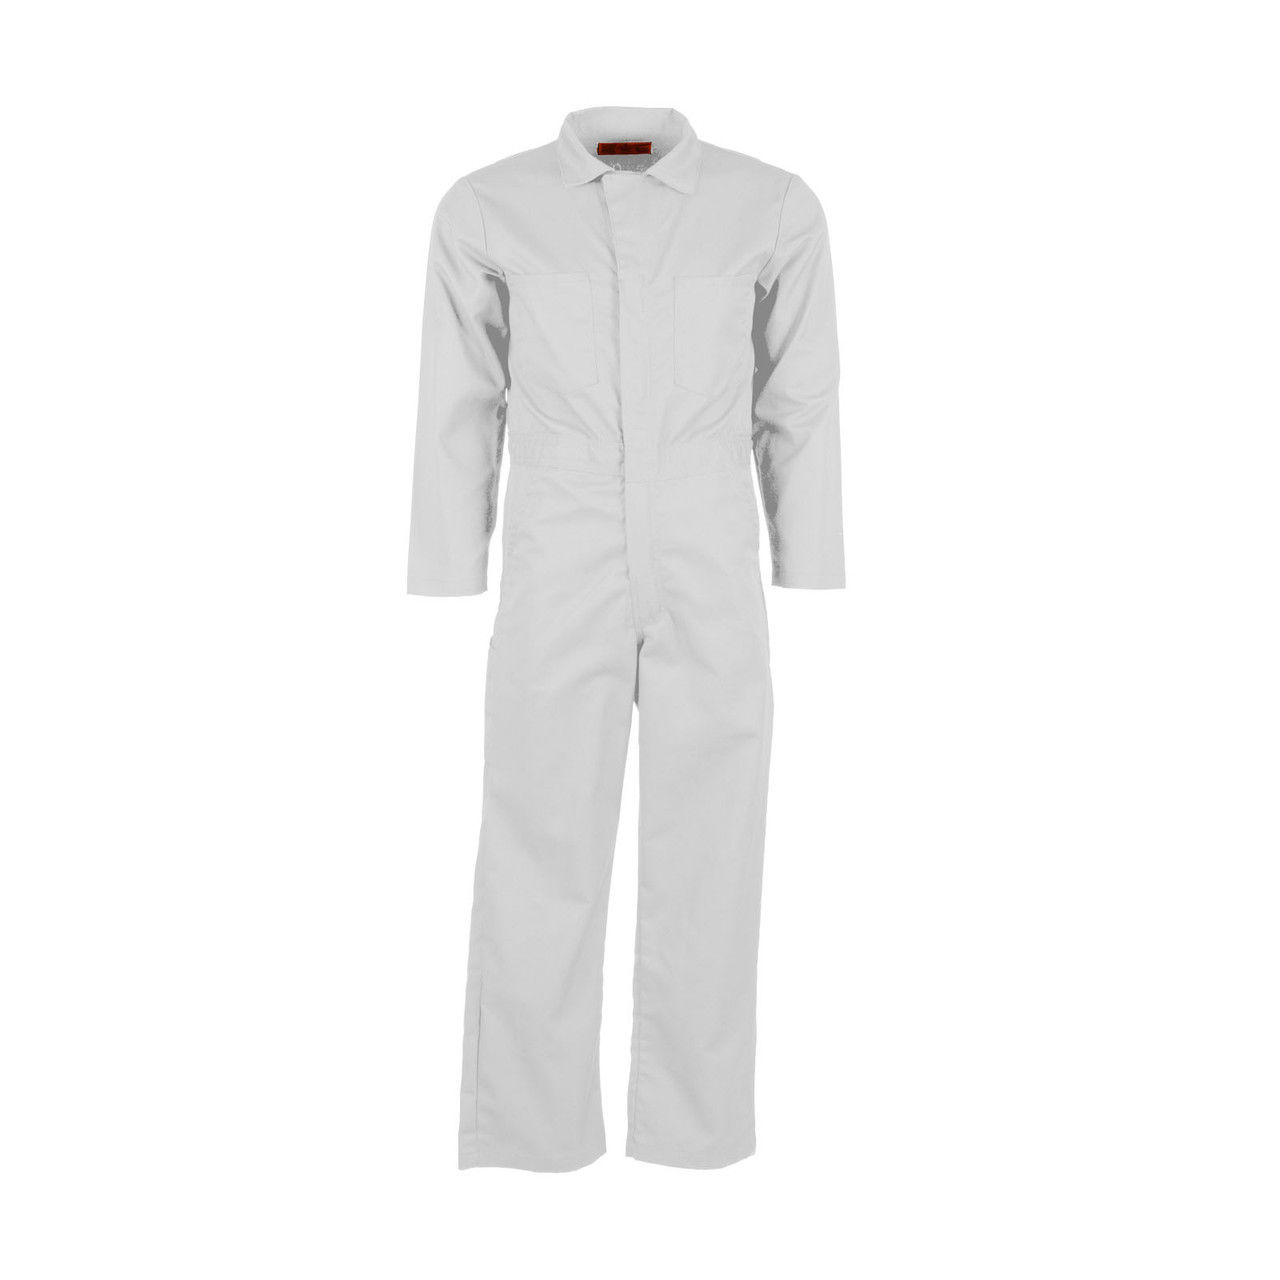 What is the fabric of Pinnacle Textile's white coveralls?